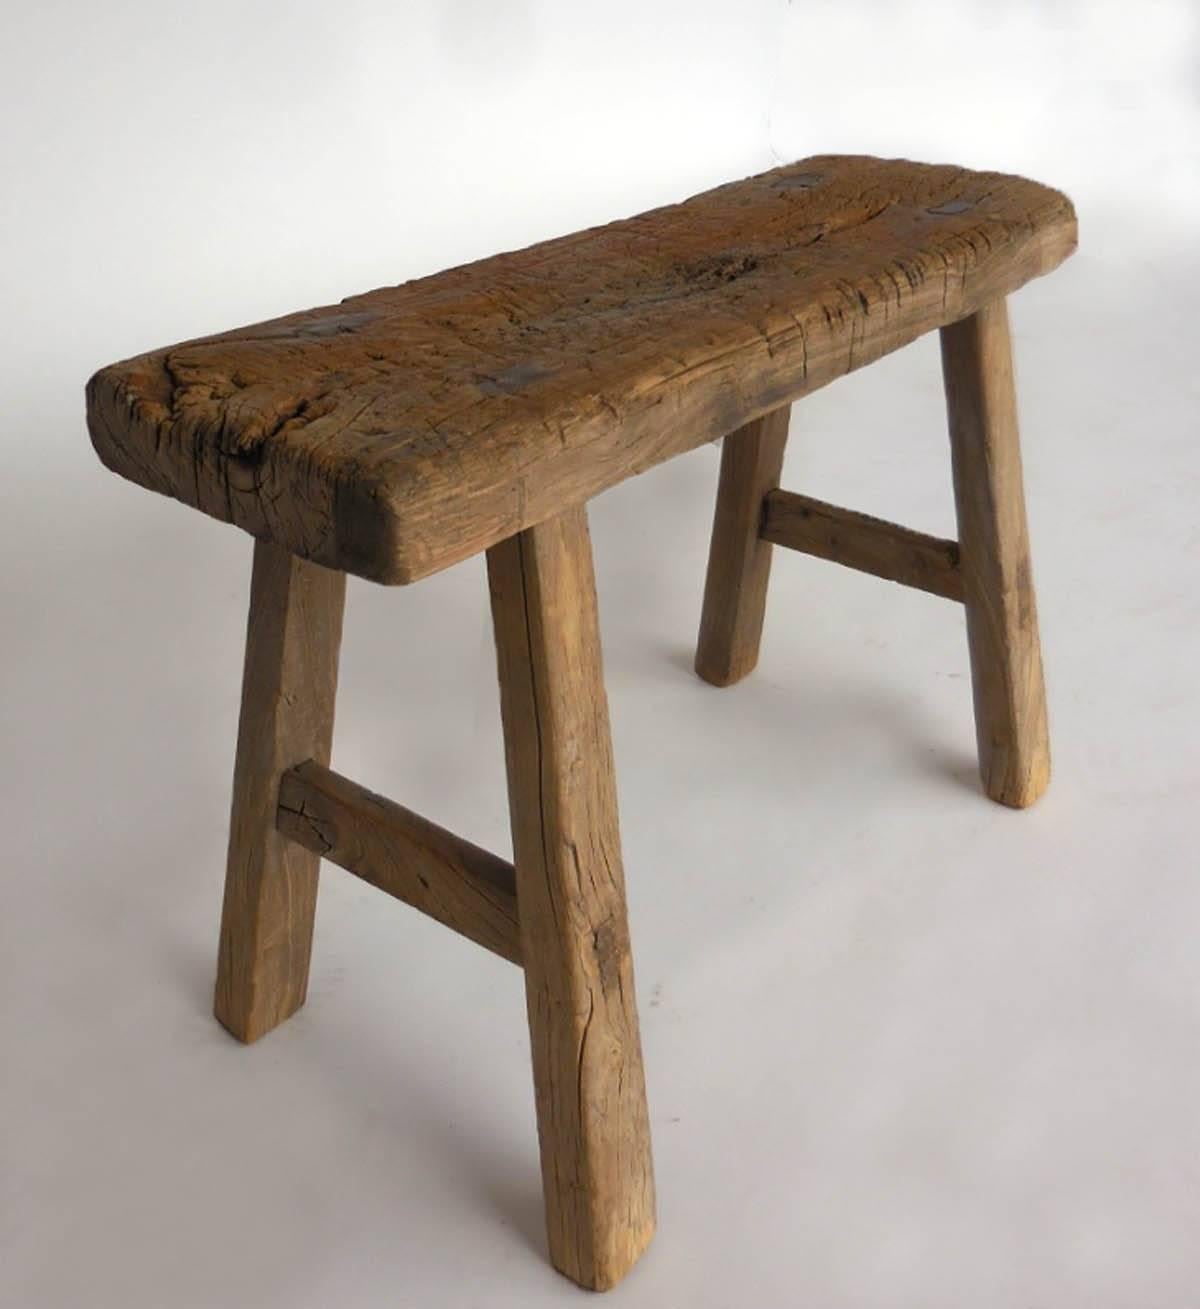 Sweet small bench made of elm showing lots of signs of use and wear but absolutely sturdy. Nice patina.